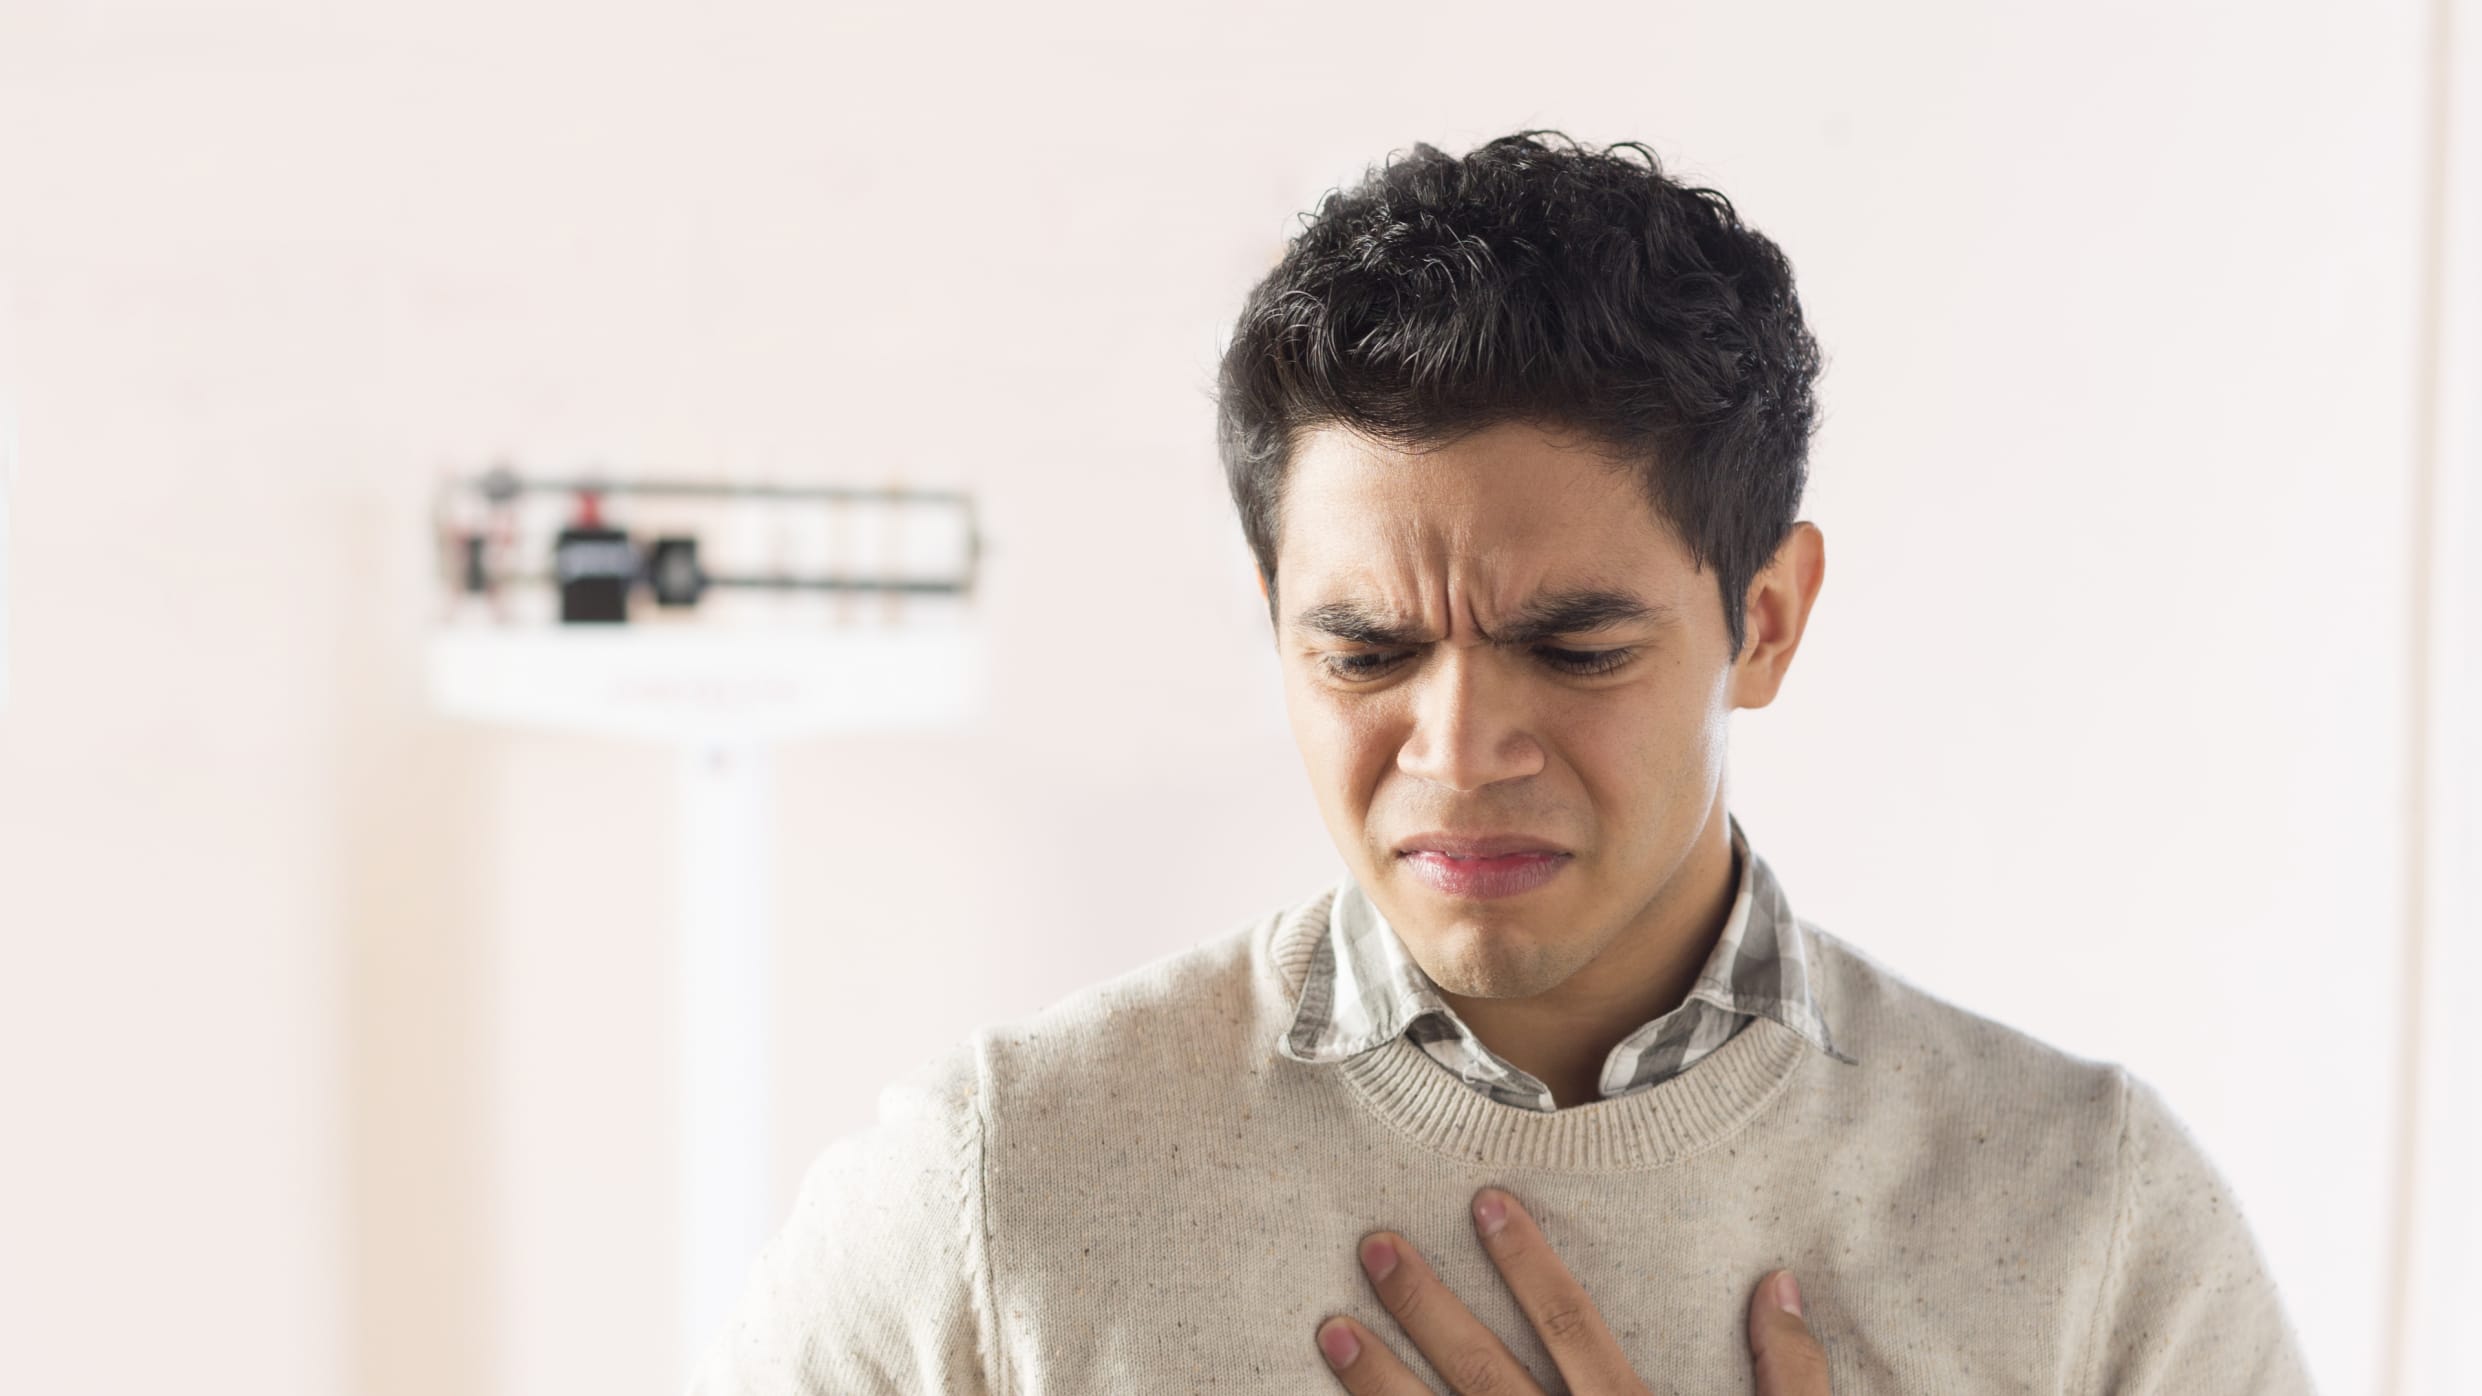 A young man experiencing dysphagia stands in an exam room holding his chest.